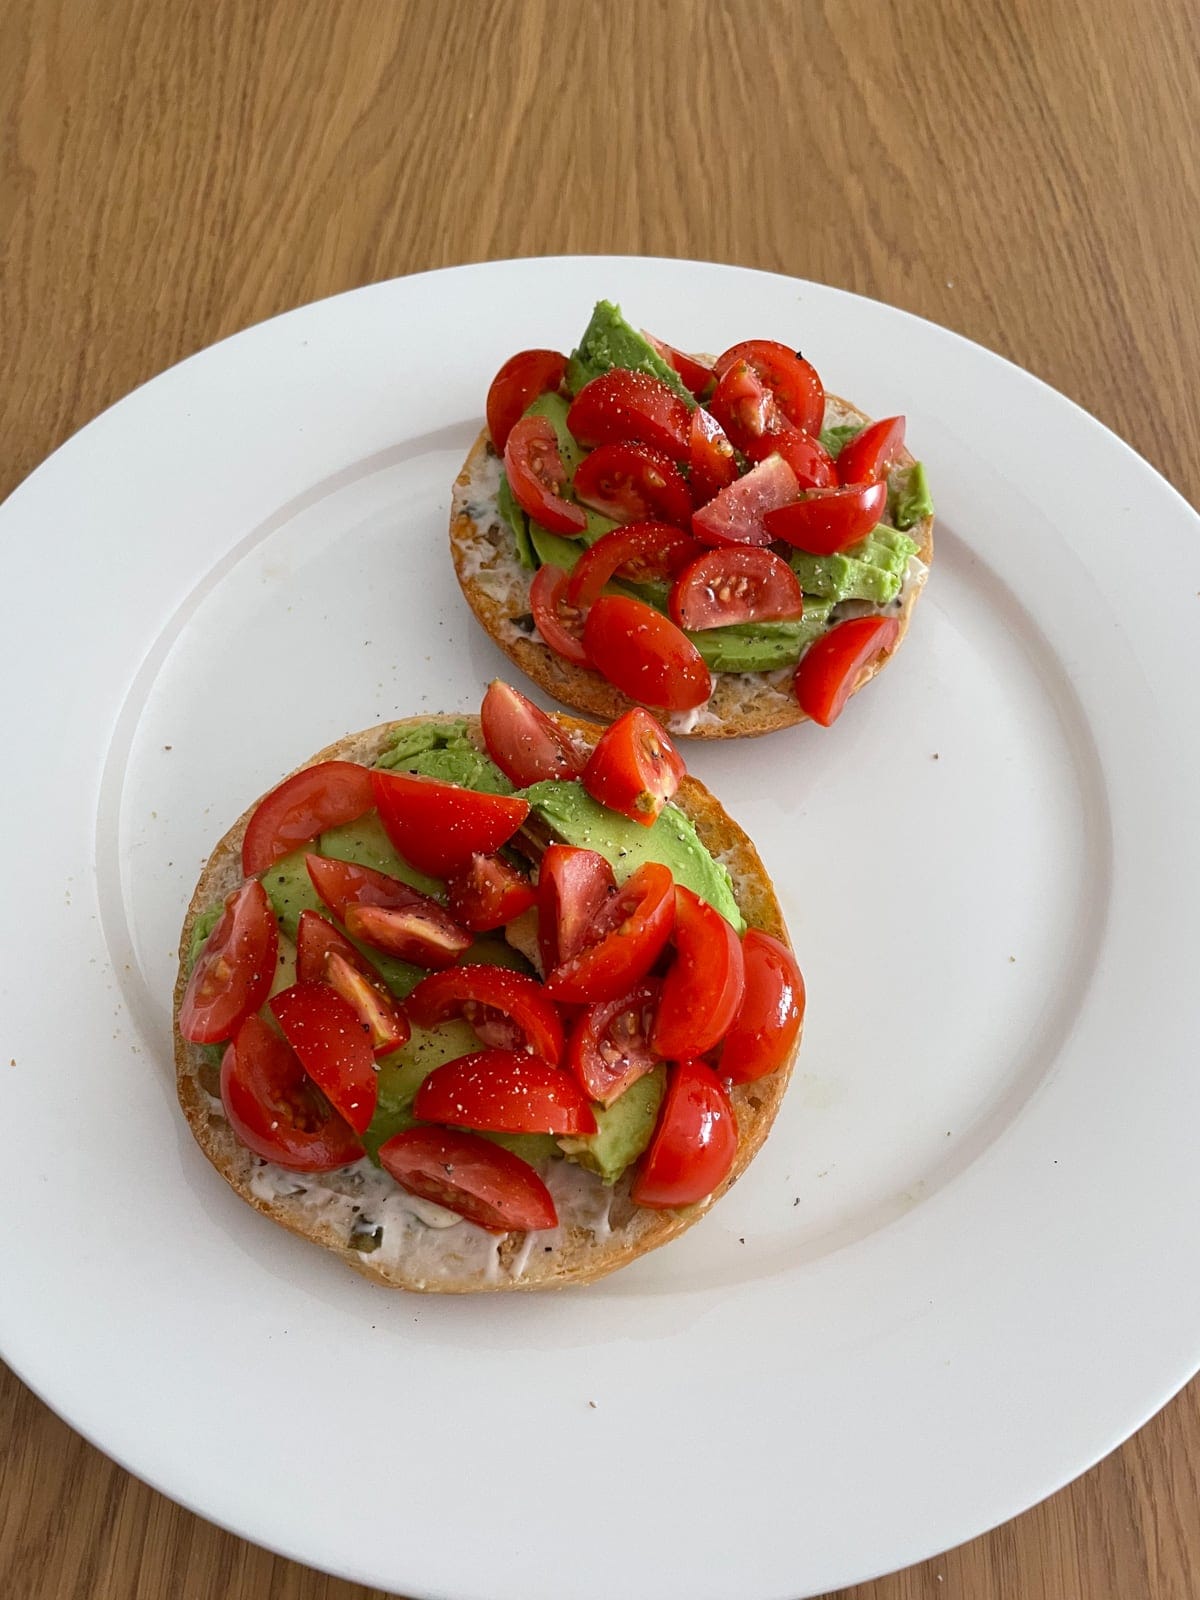 A white plate with an open bagel served on top, with sliced avocado and wedges of cherry tomatoes